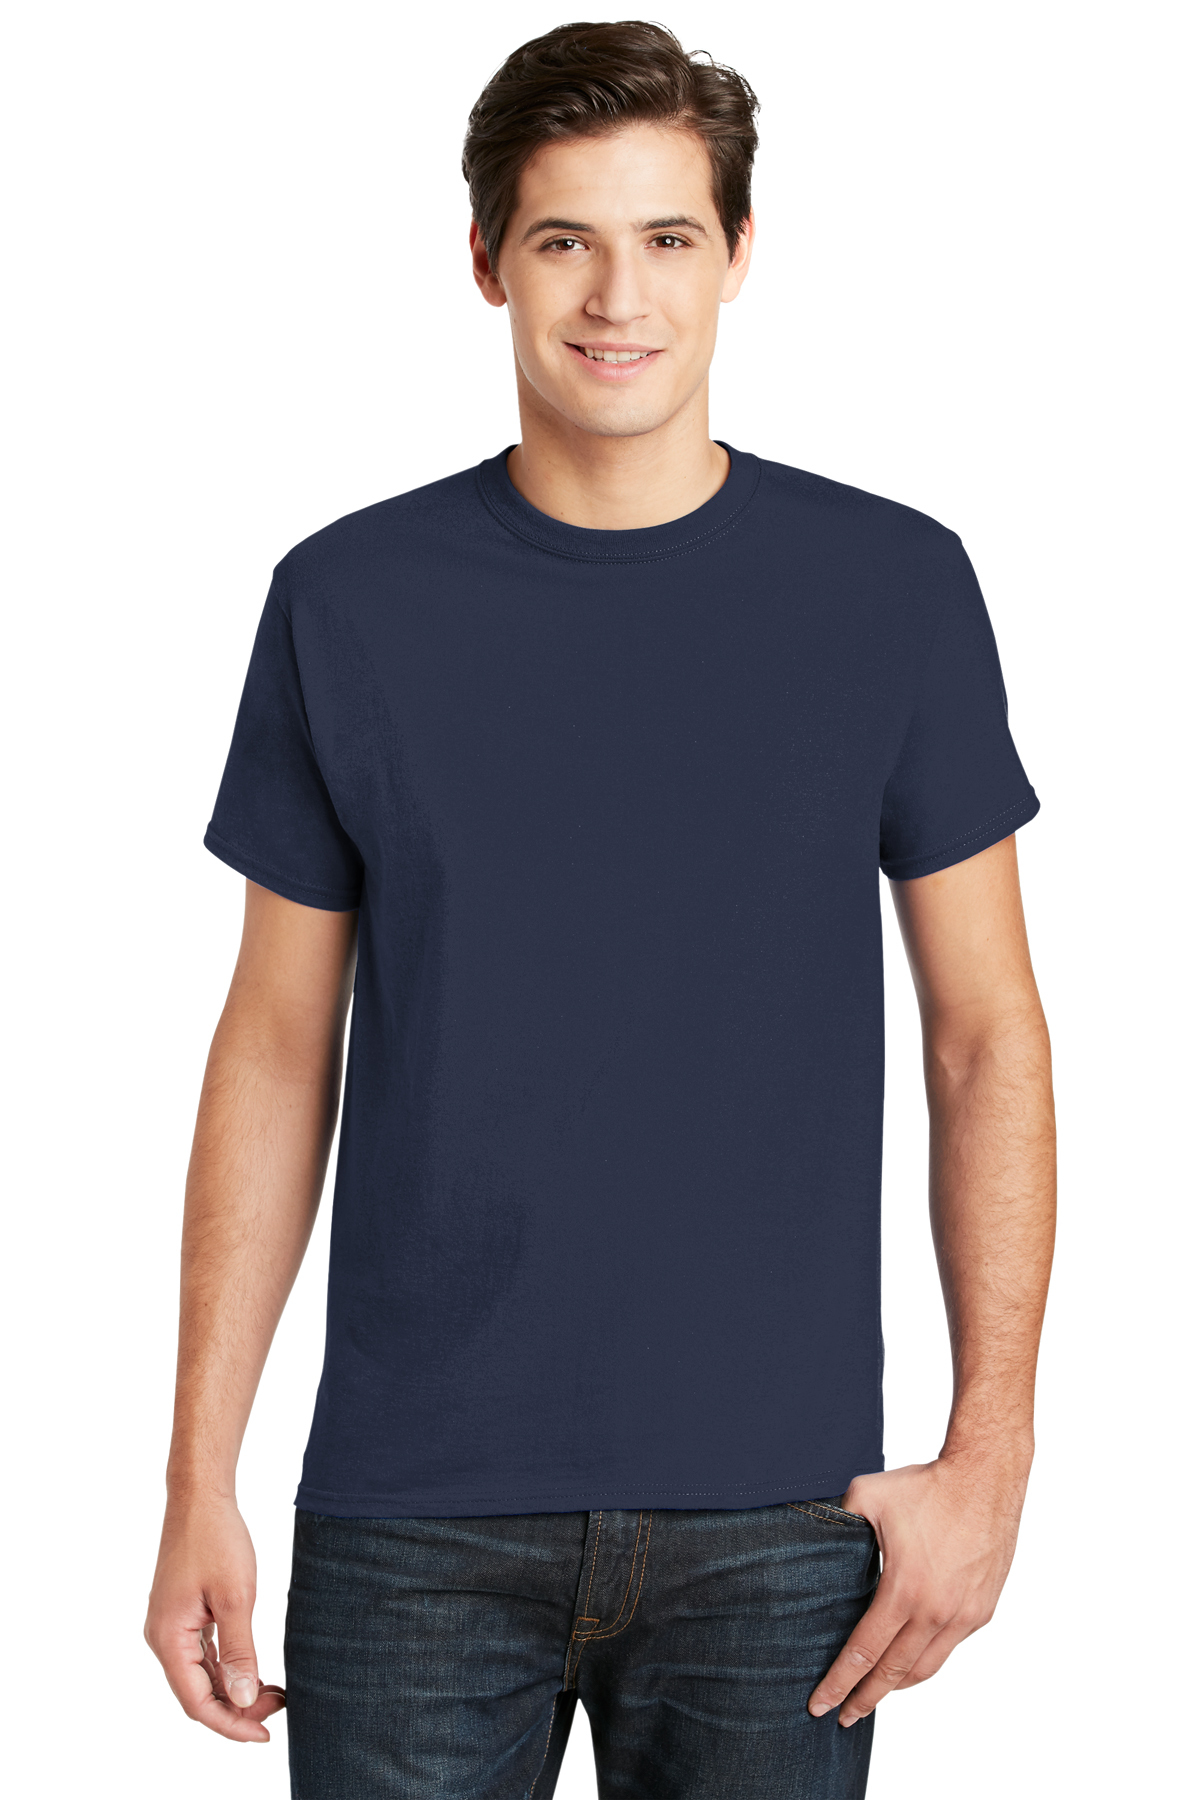 Hanes - Essential-T 100% Cotton T-Shirt | Product | Company Casuals